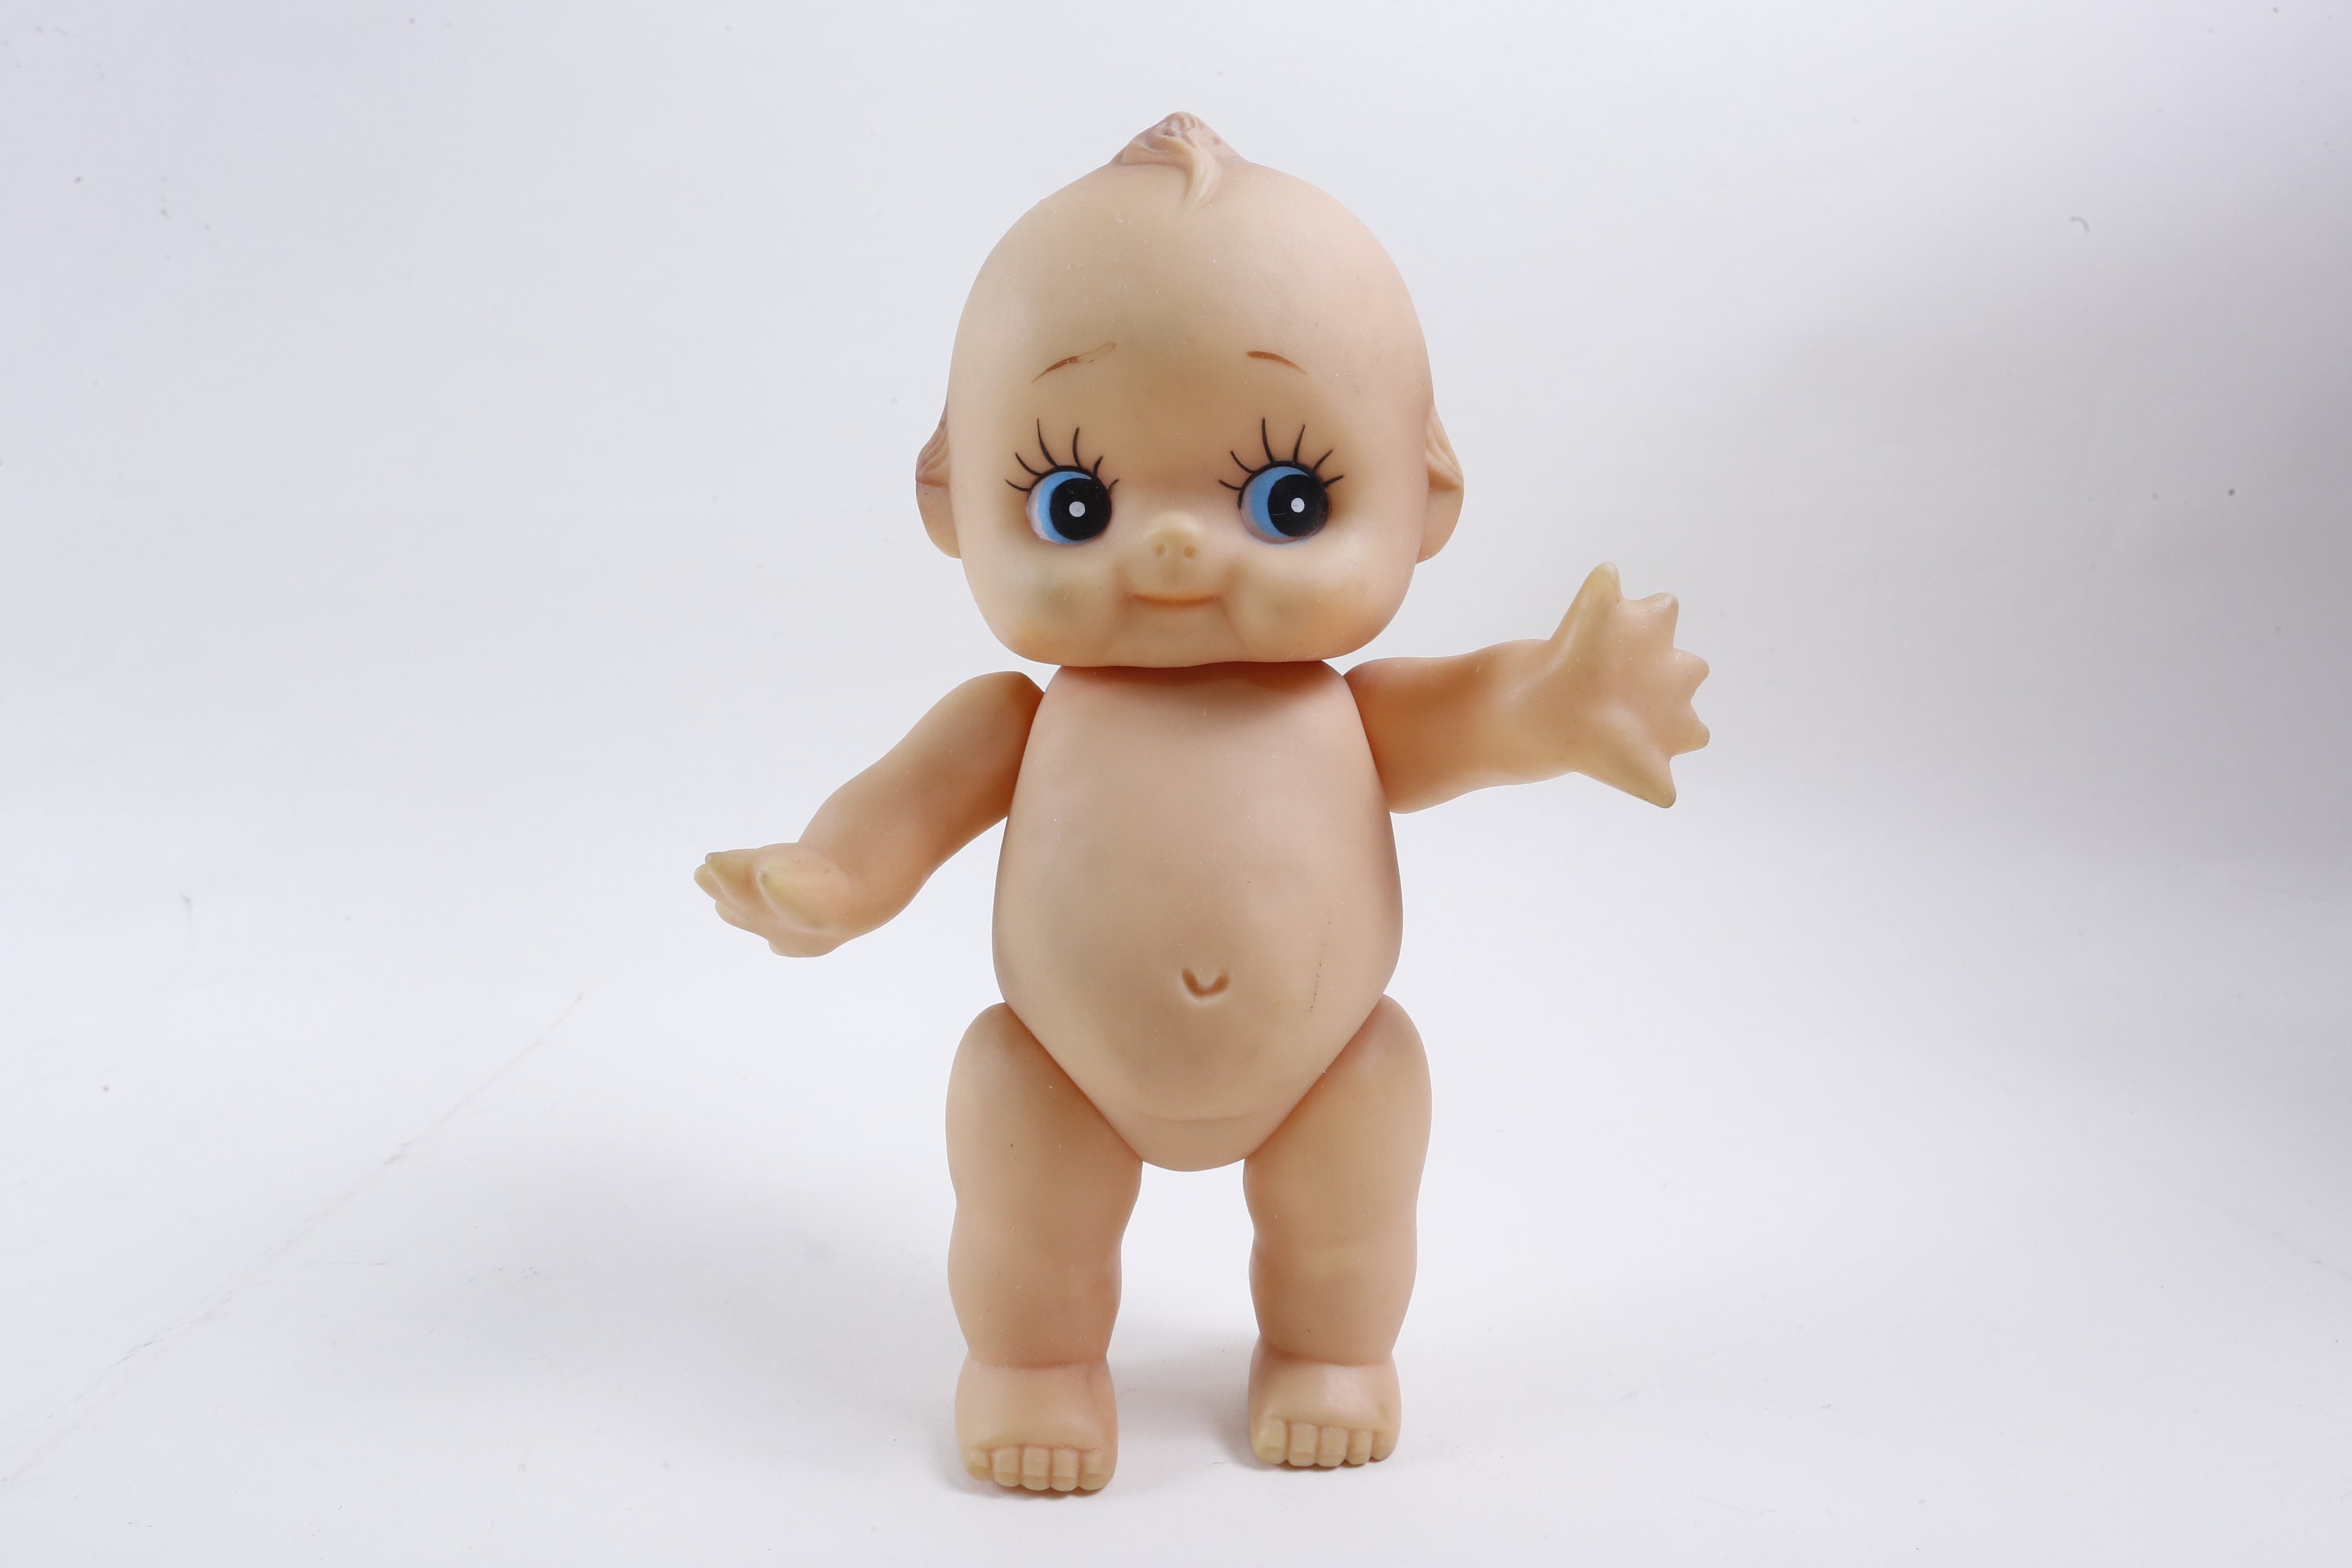 Toddler Girls Porn Cartoons - Adorable Kewpie Kitsch Baby Nude Doll Toy Blue Eyes Movable Limbs Plastic  Figure Children Vintage Collection ~ 170627